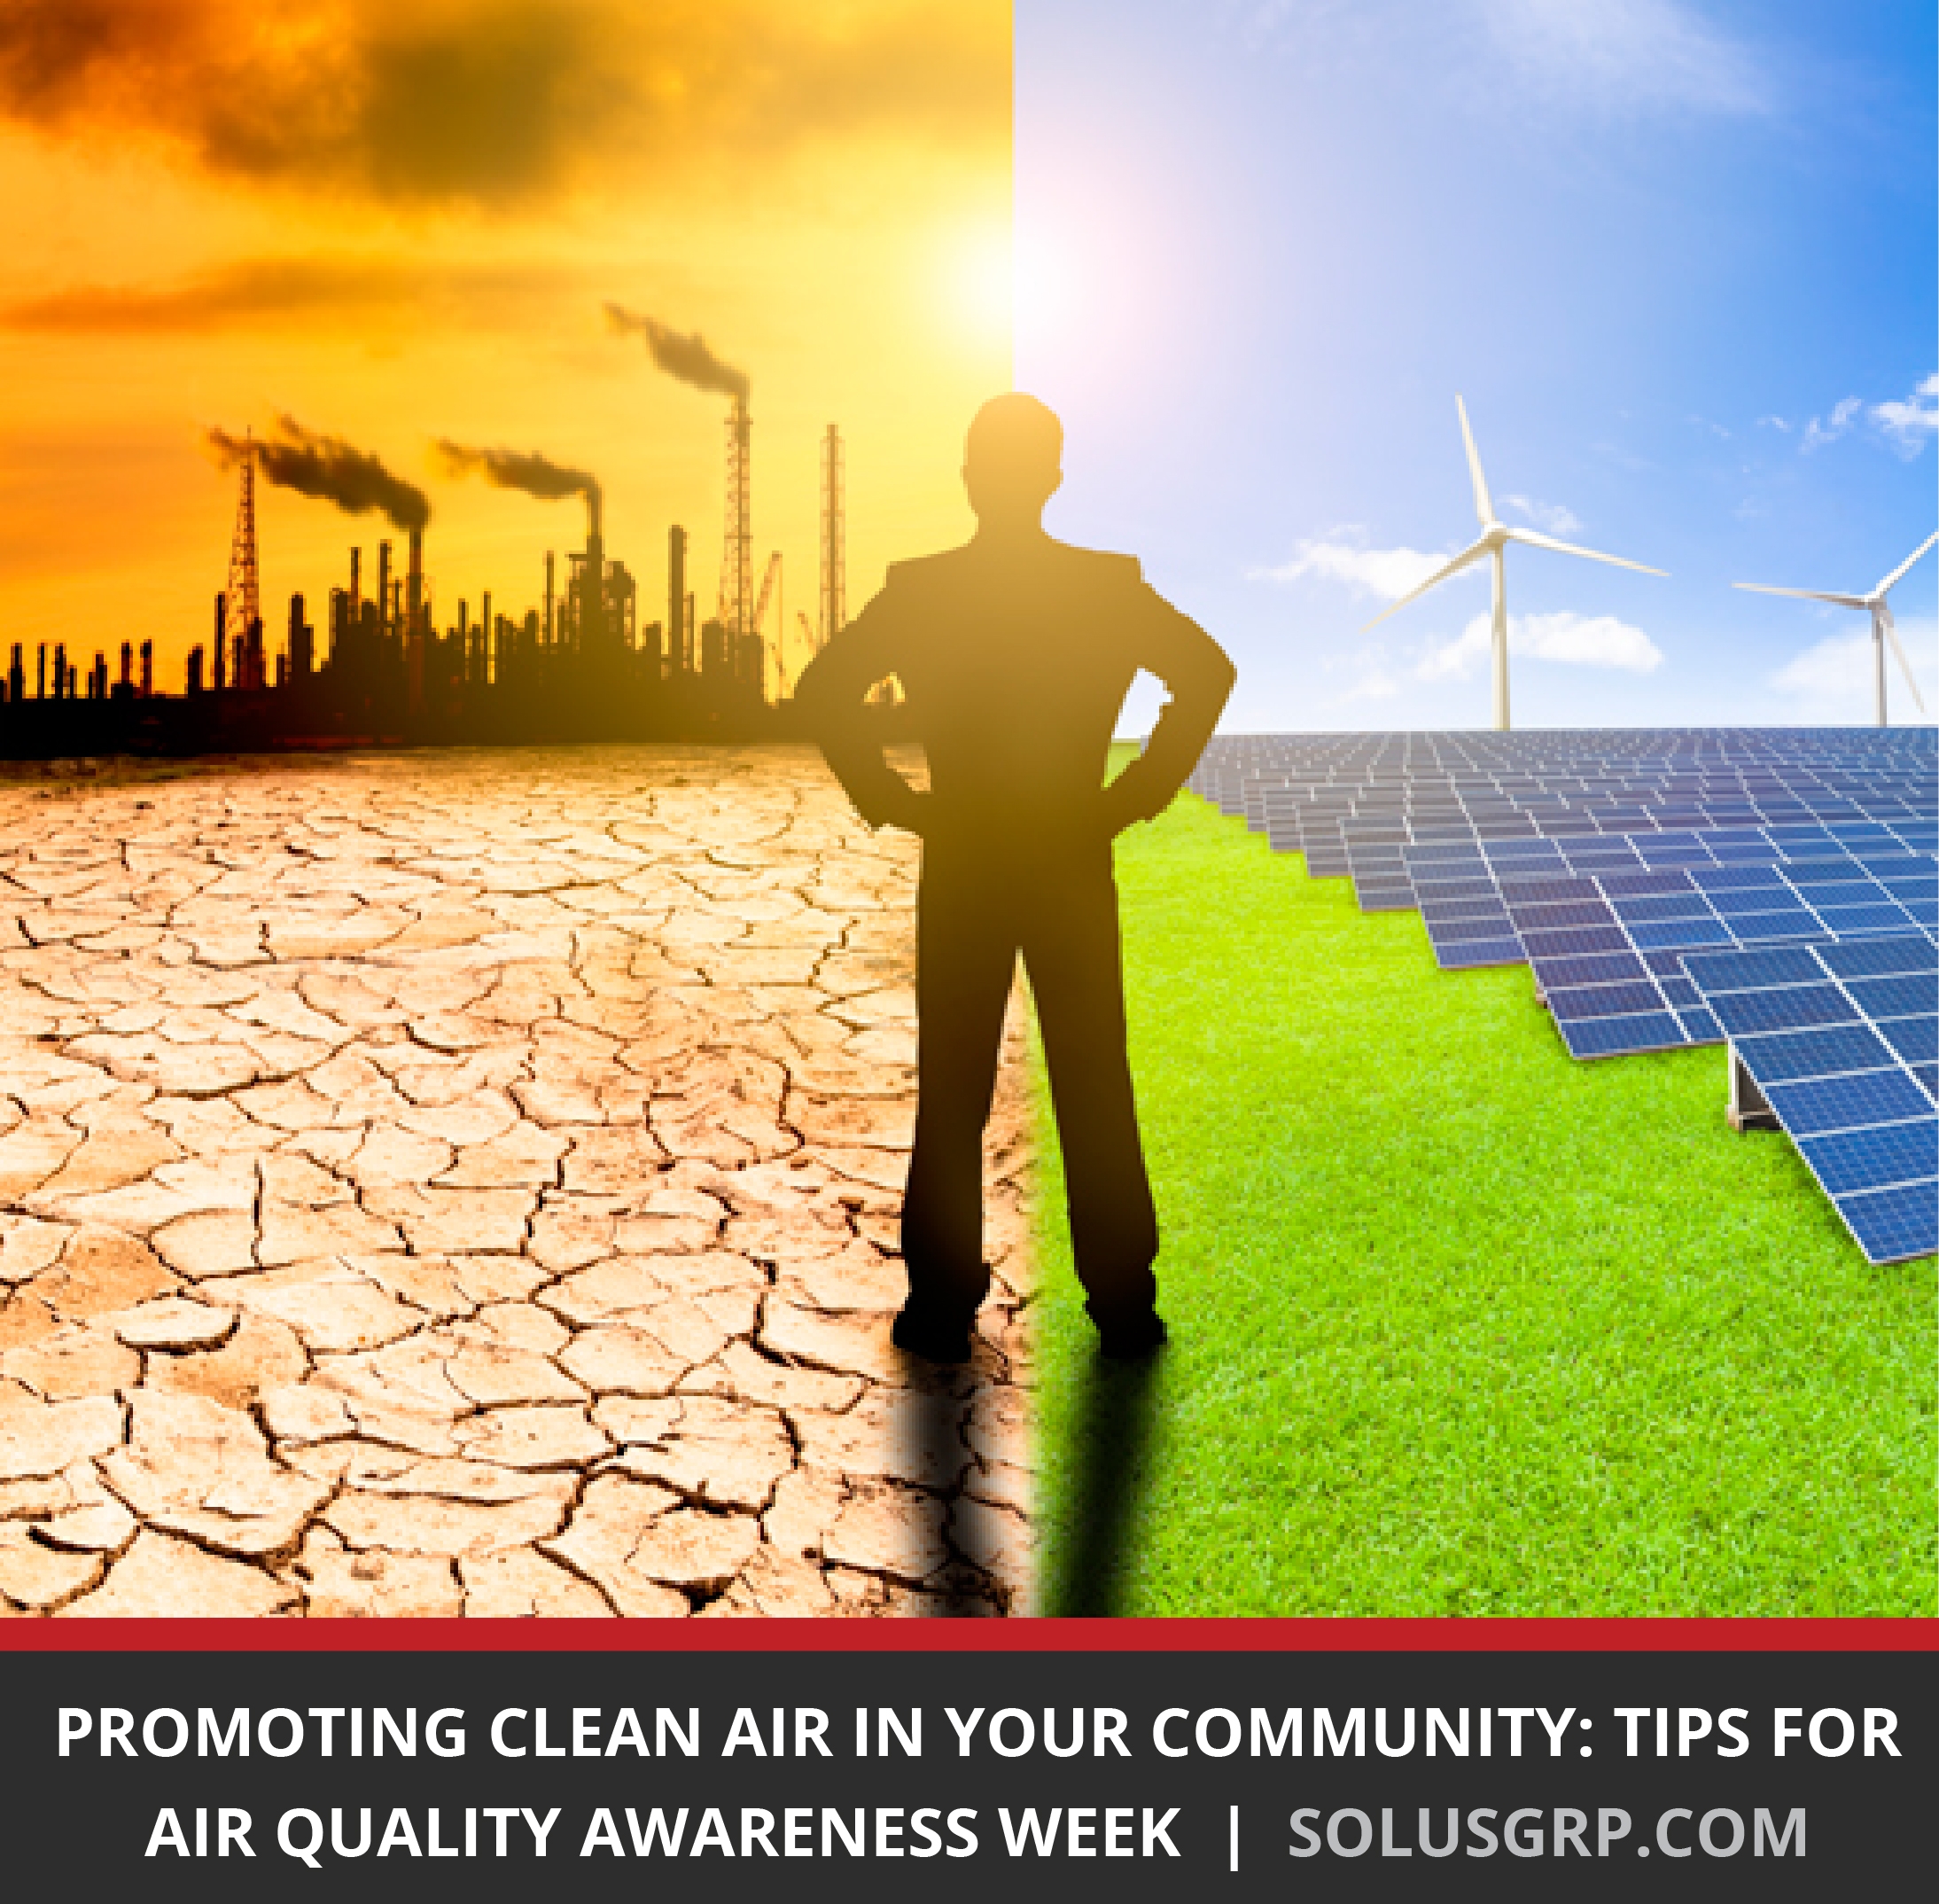 Promoting Clean Air in Your Community: Tips for Air Quality Awareness Week